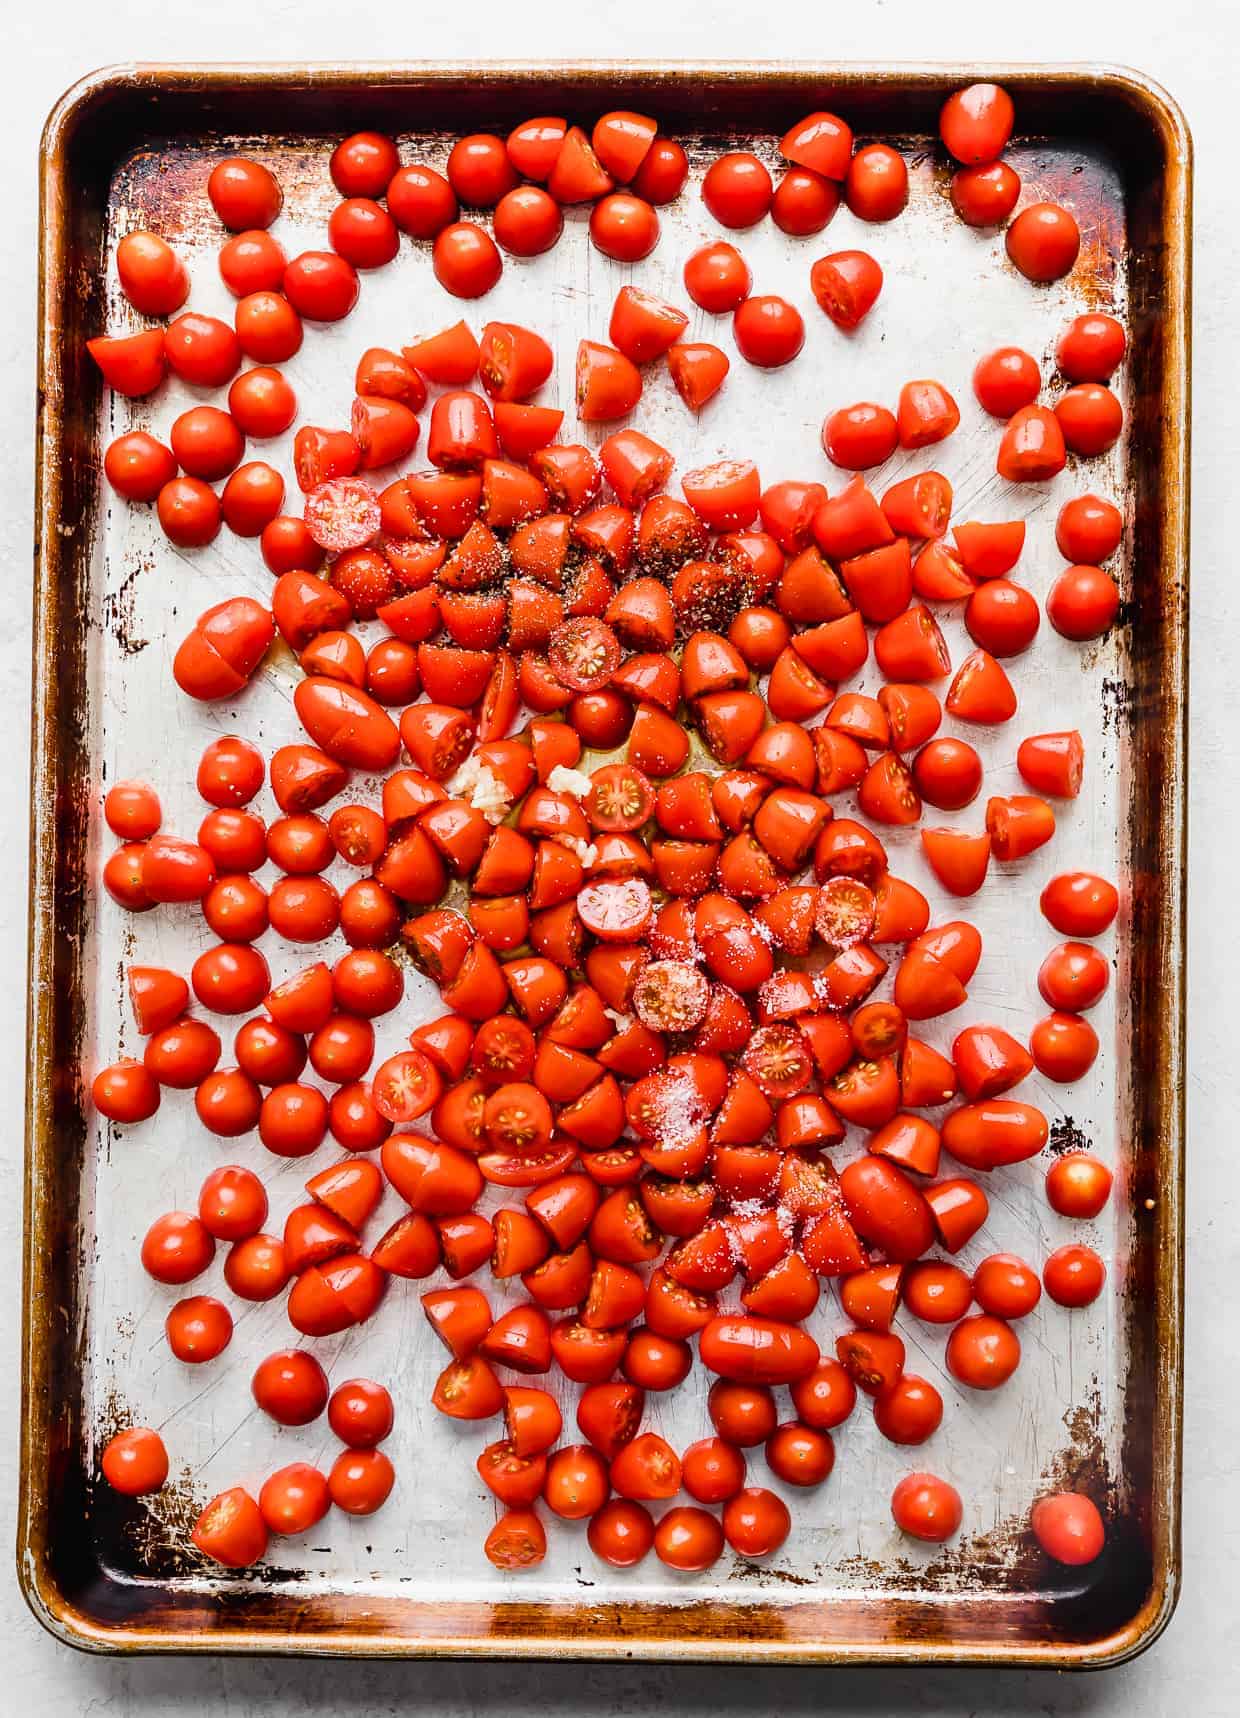 Small red tomatoes on a baking sheet topped with salt, pepper, and fresh garlic.